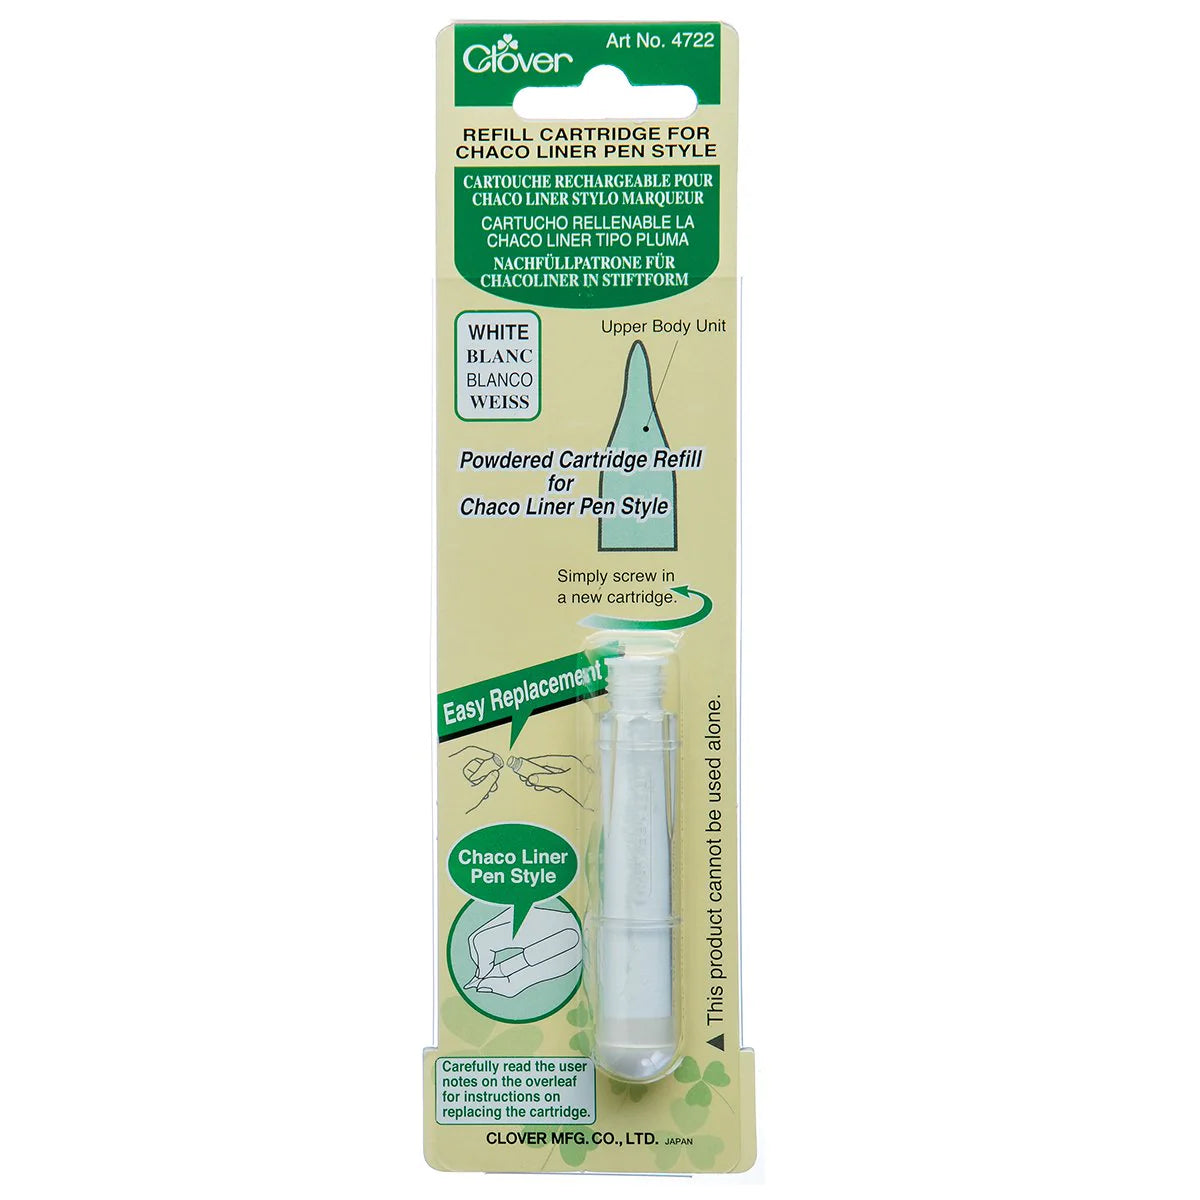 Pen-Style Chaco Liner Refill Cartridge